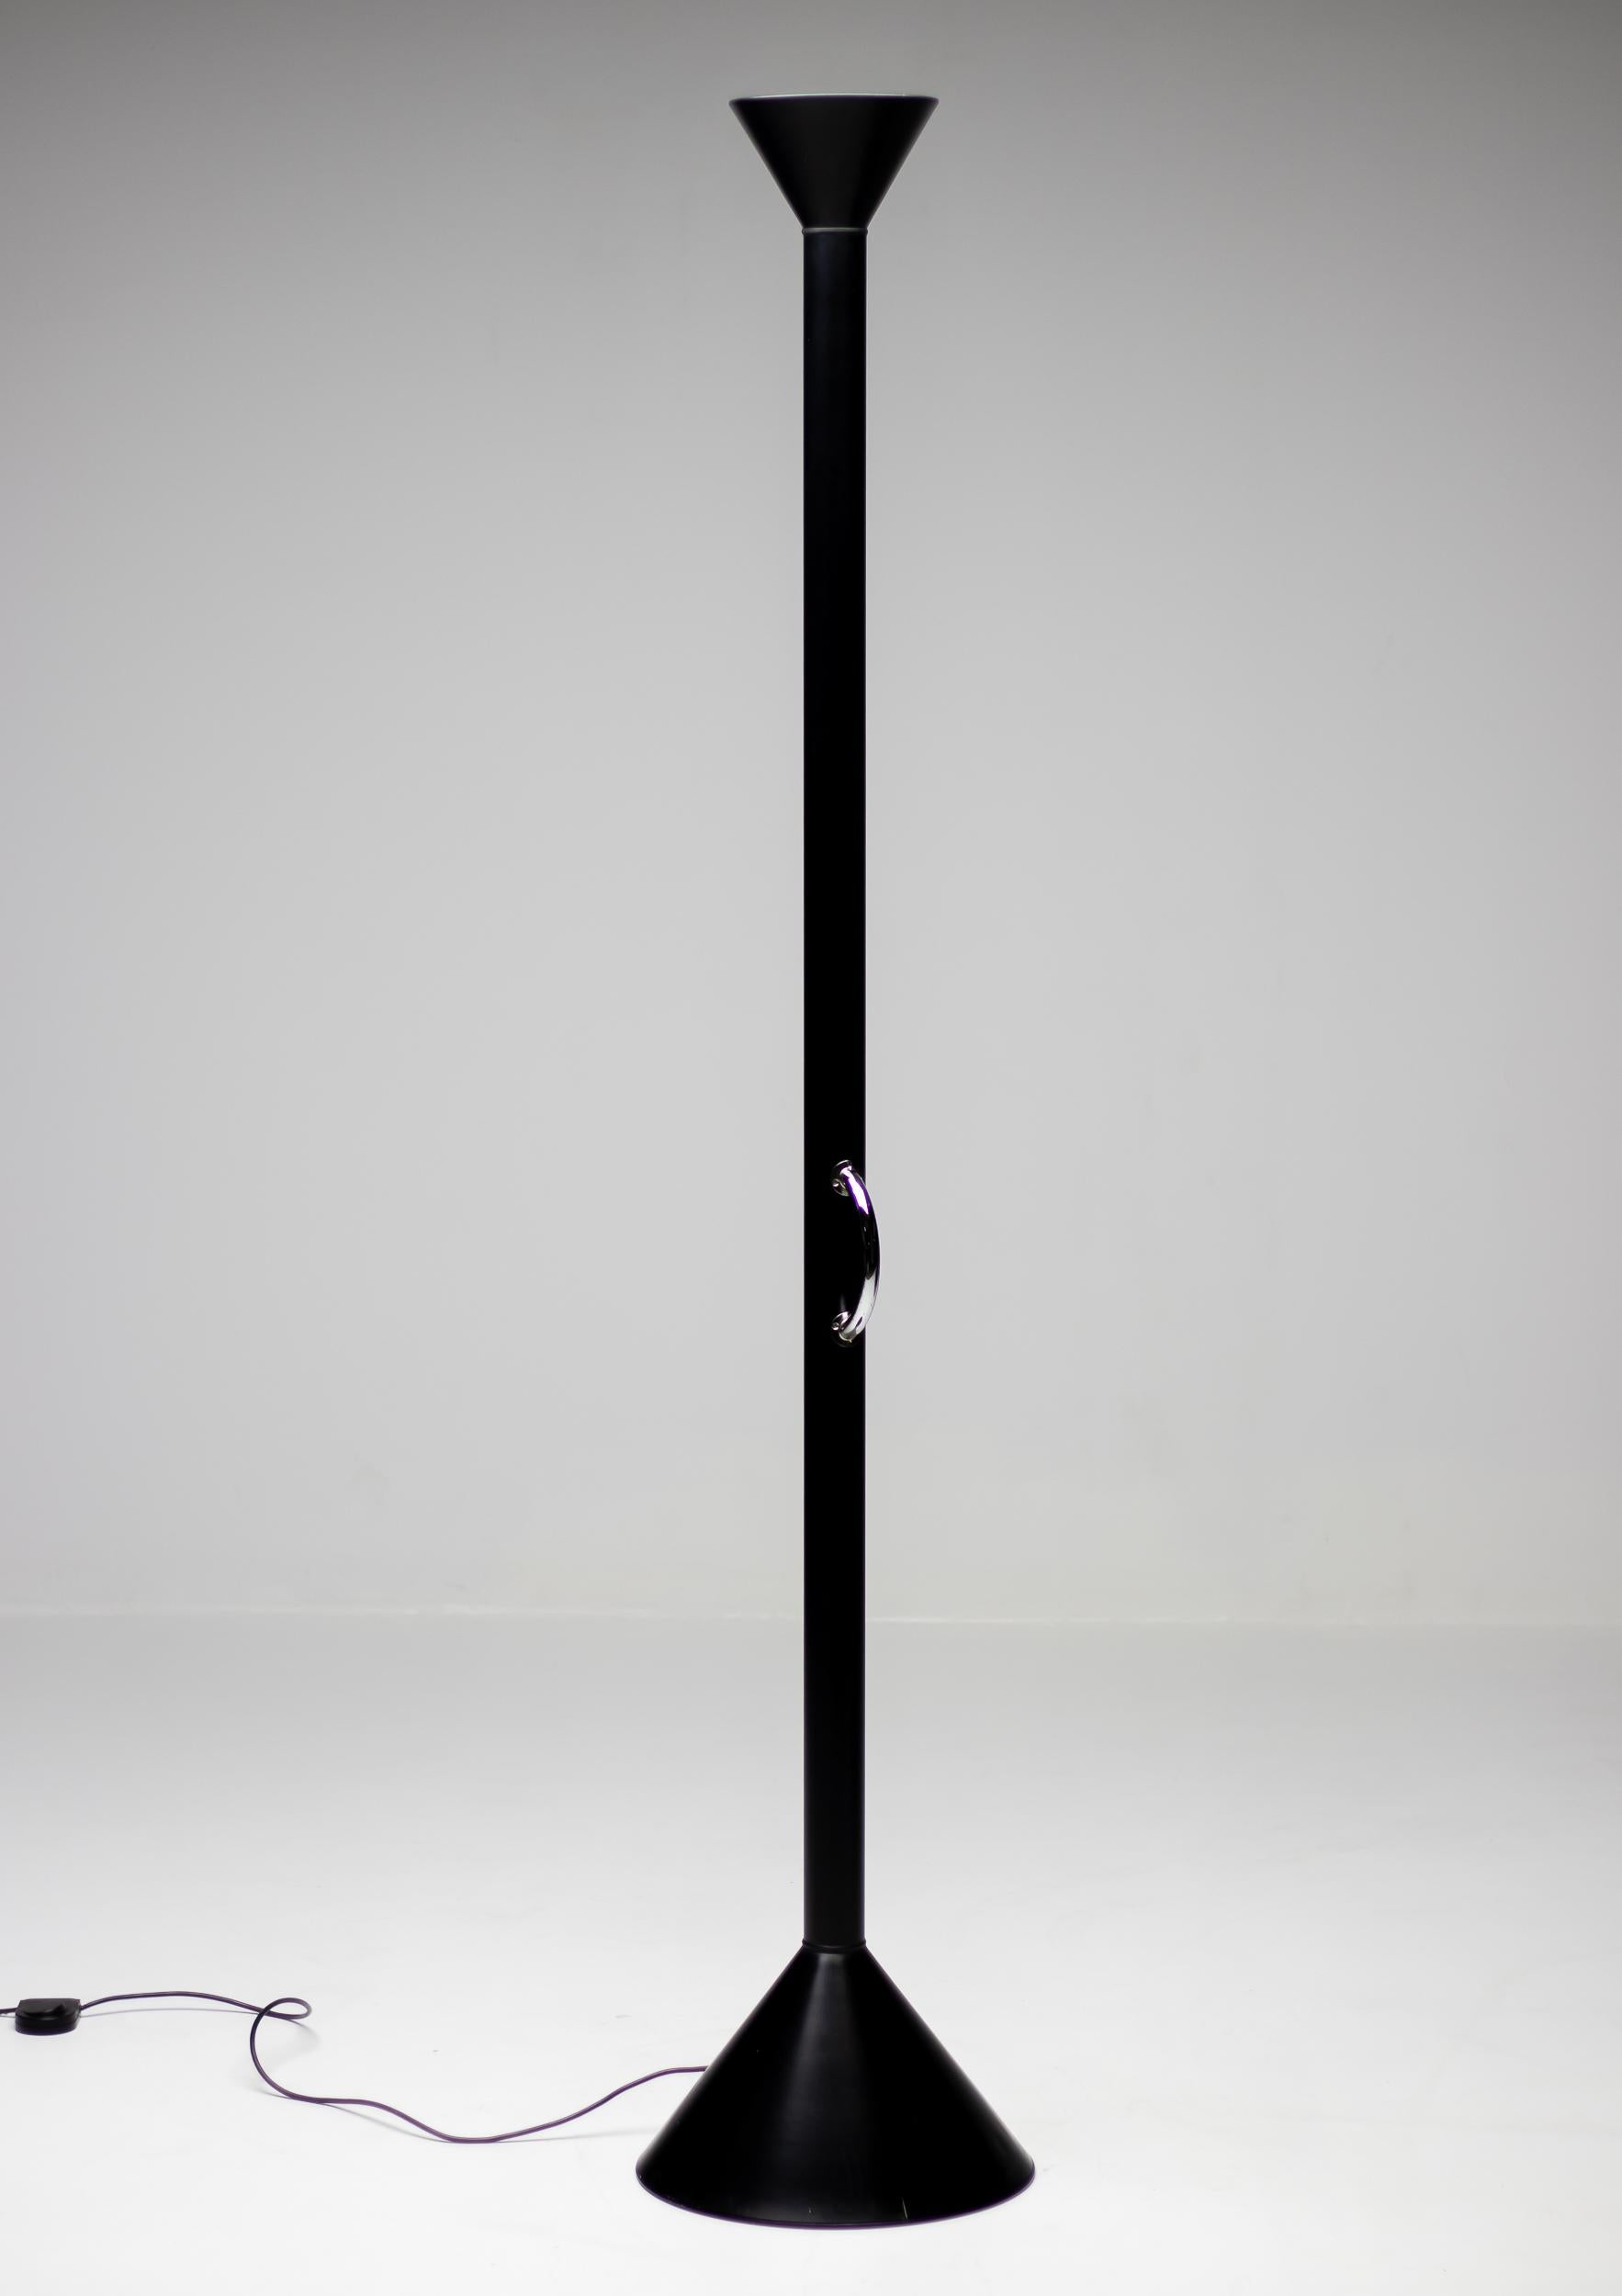 Limited Edition Callimaco floor lamp by Ettore Sottsass in black.
Callimaco was designed by Ettore Sottsass for Artemide in 1982 and became a true icon of 1980s.
The lamp lacks all unnecessary parts and strips down to pure functionality. This very